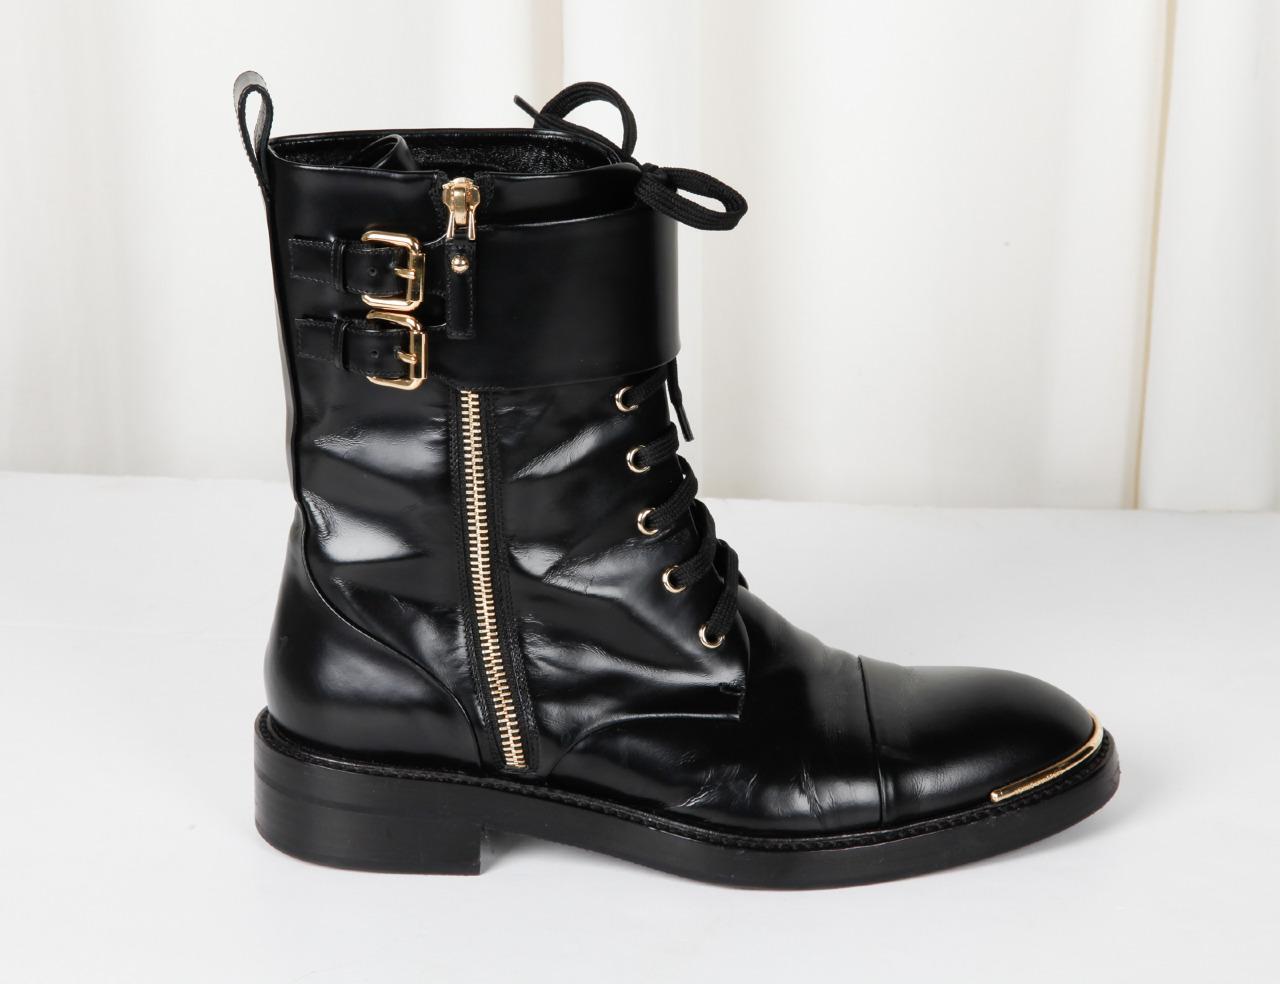 LOUIS VUITTON Womens Casual Black Leather Lace-Up Ankle Low Heel Boots 8-38 | eBay